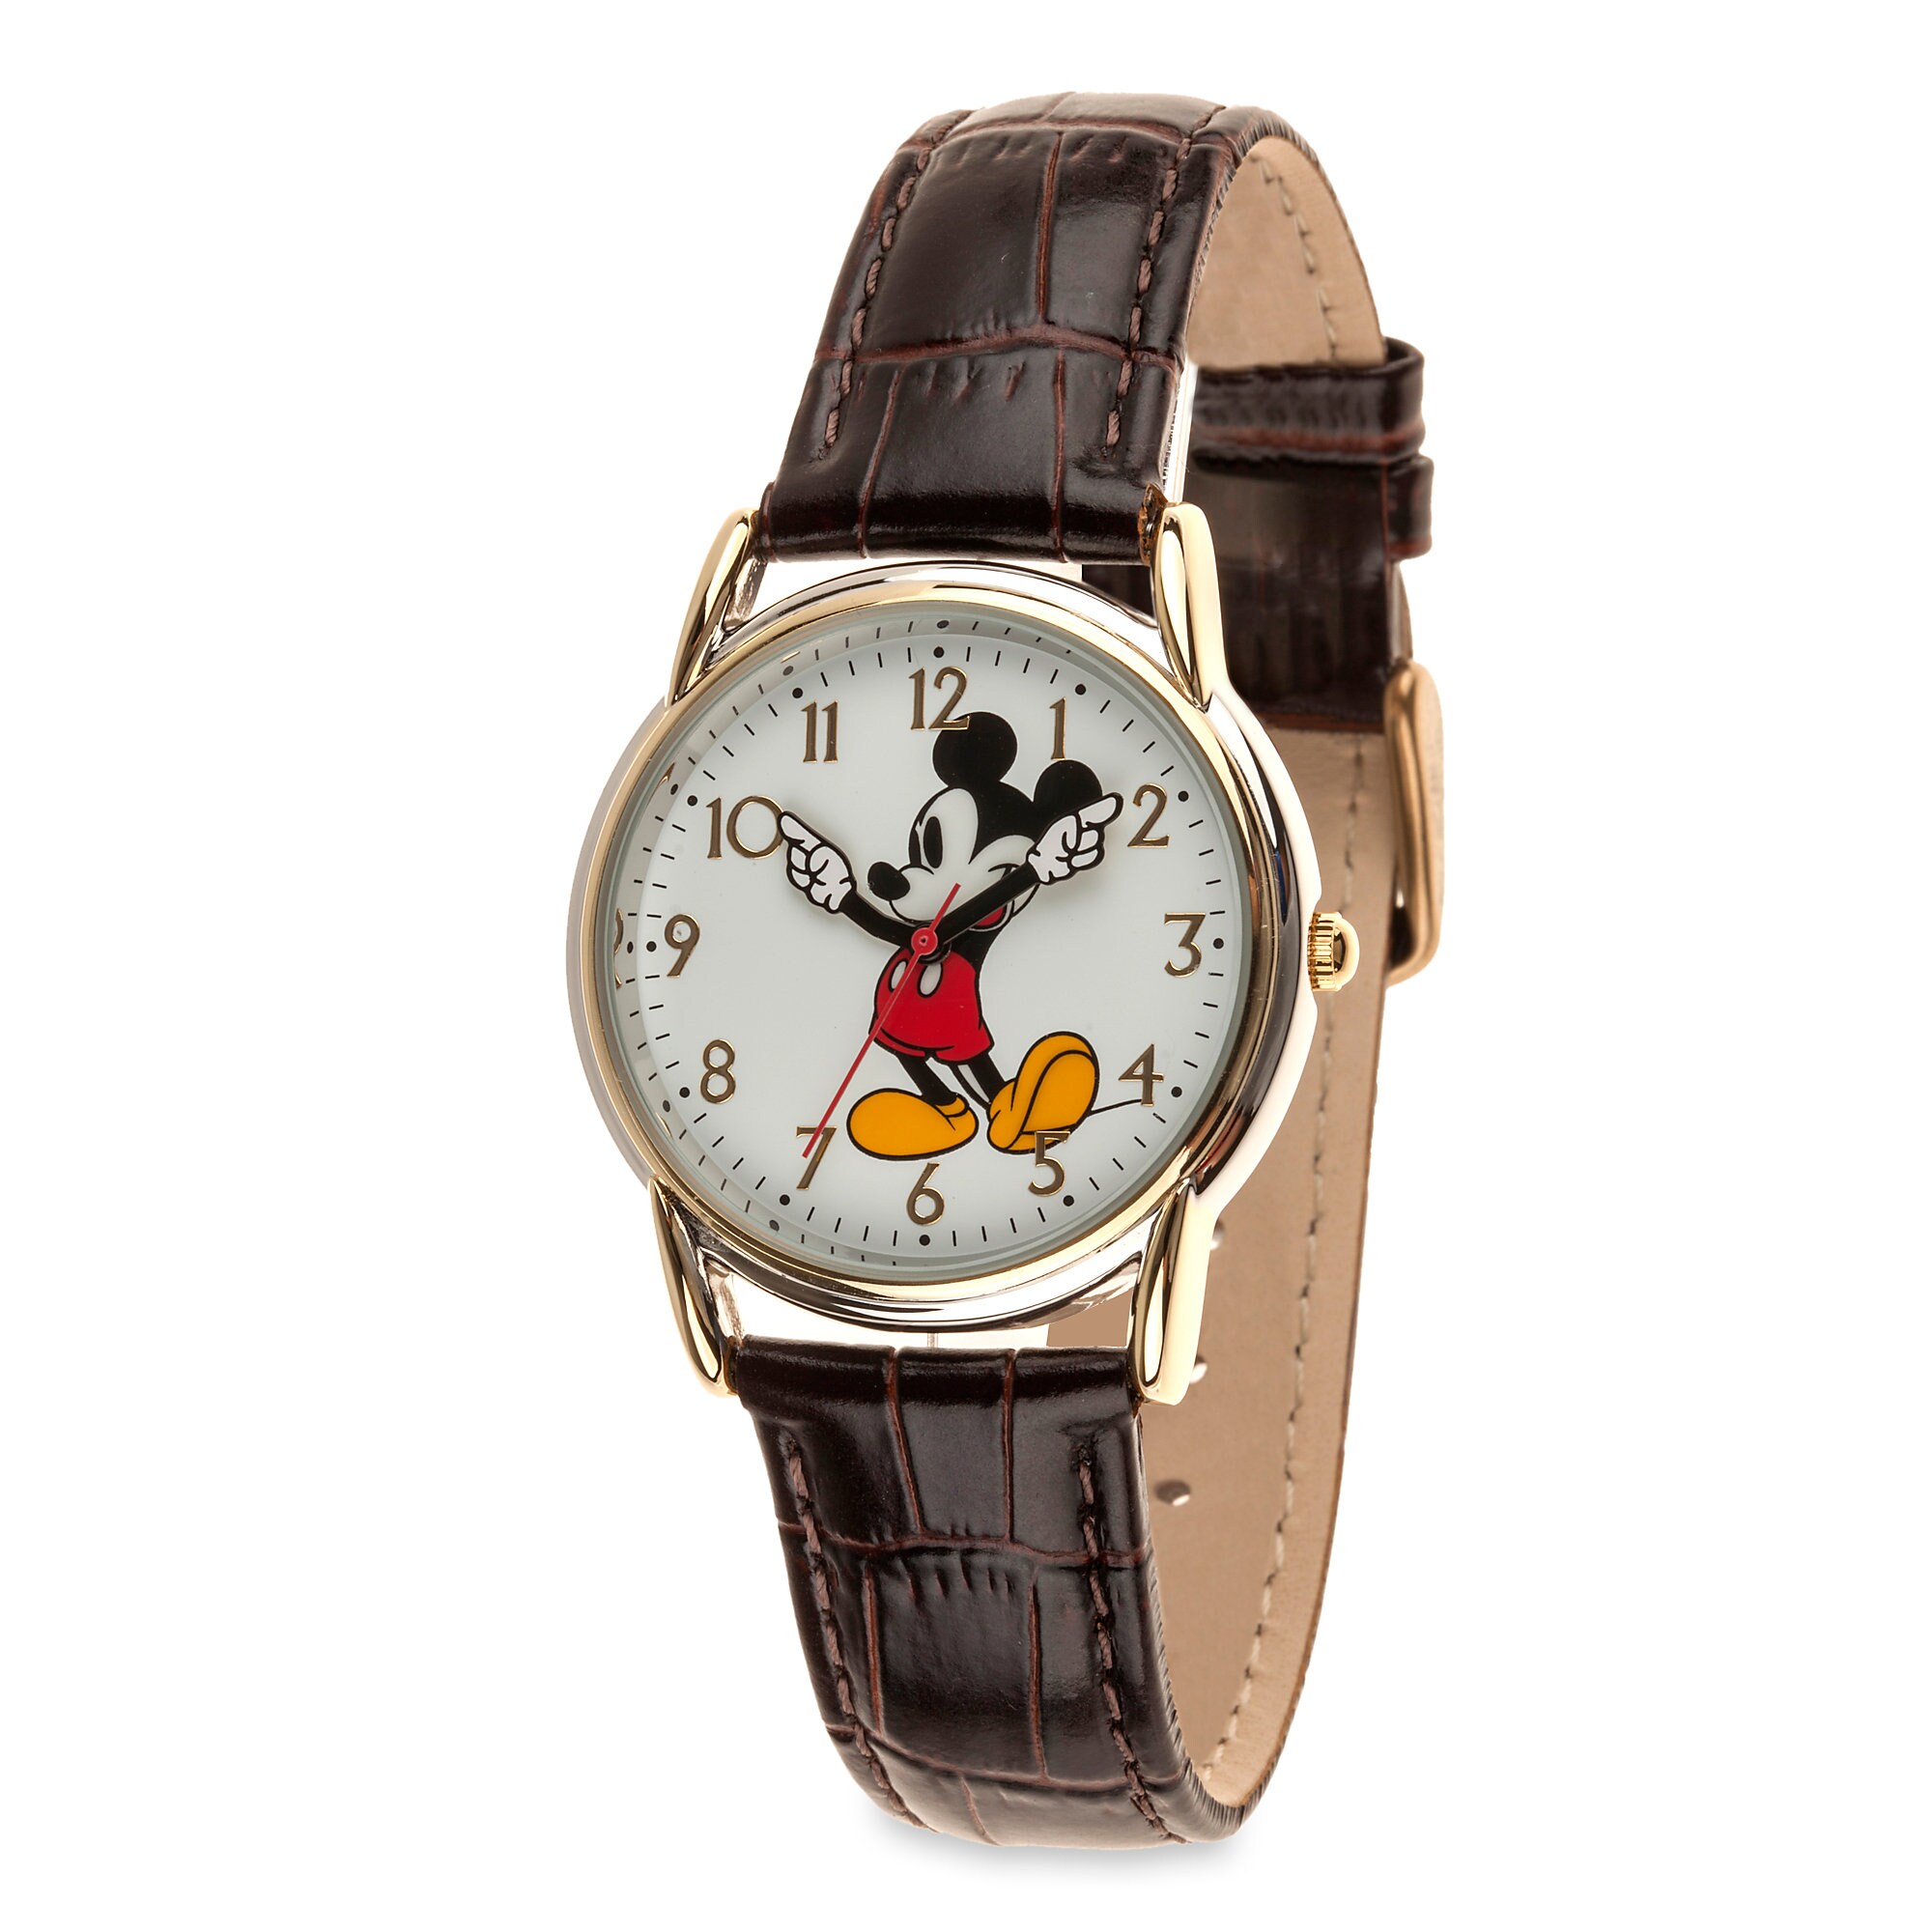 Classic Mickey Mouse Watch - Adults